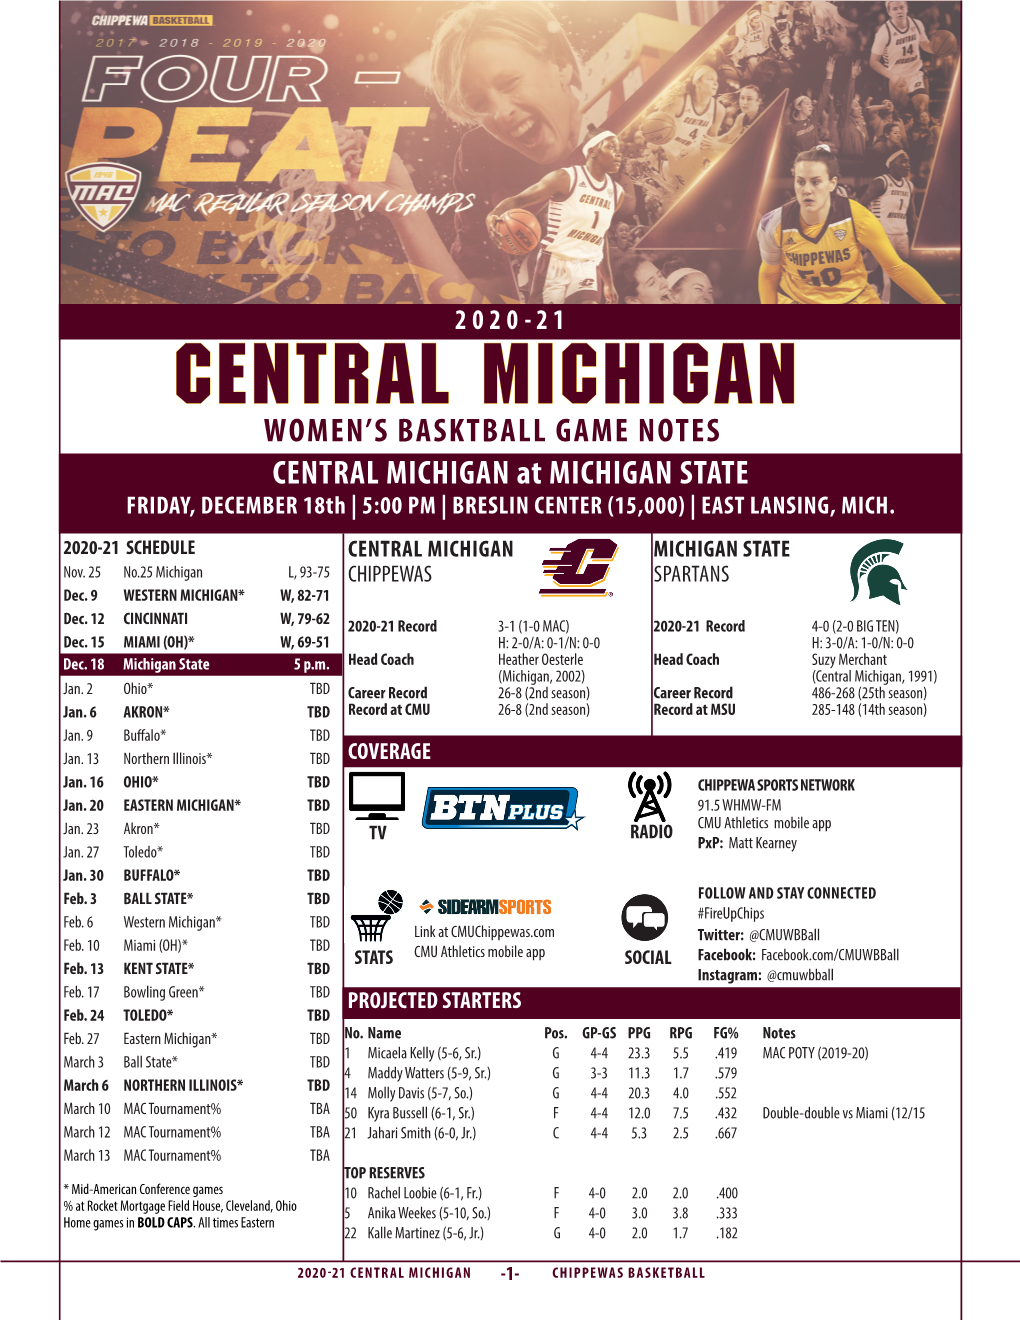 CENTRAL MICHIGAN WOMEN’S BASKTBALL GAME NOTES CENTRAL MICHIGAN at MICHIGAN STATE FRIDAY, DECEMBER 18Th | 5:00 PM | BRESLIN CENTER (15,000) | EAST LANSING, MICH